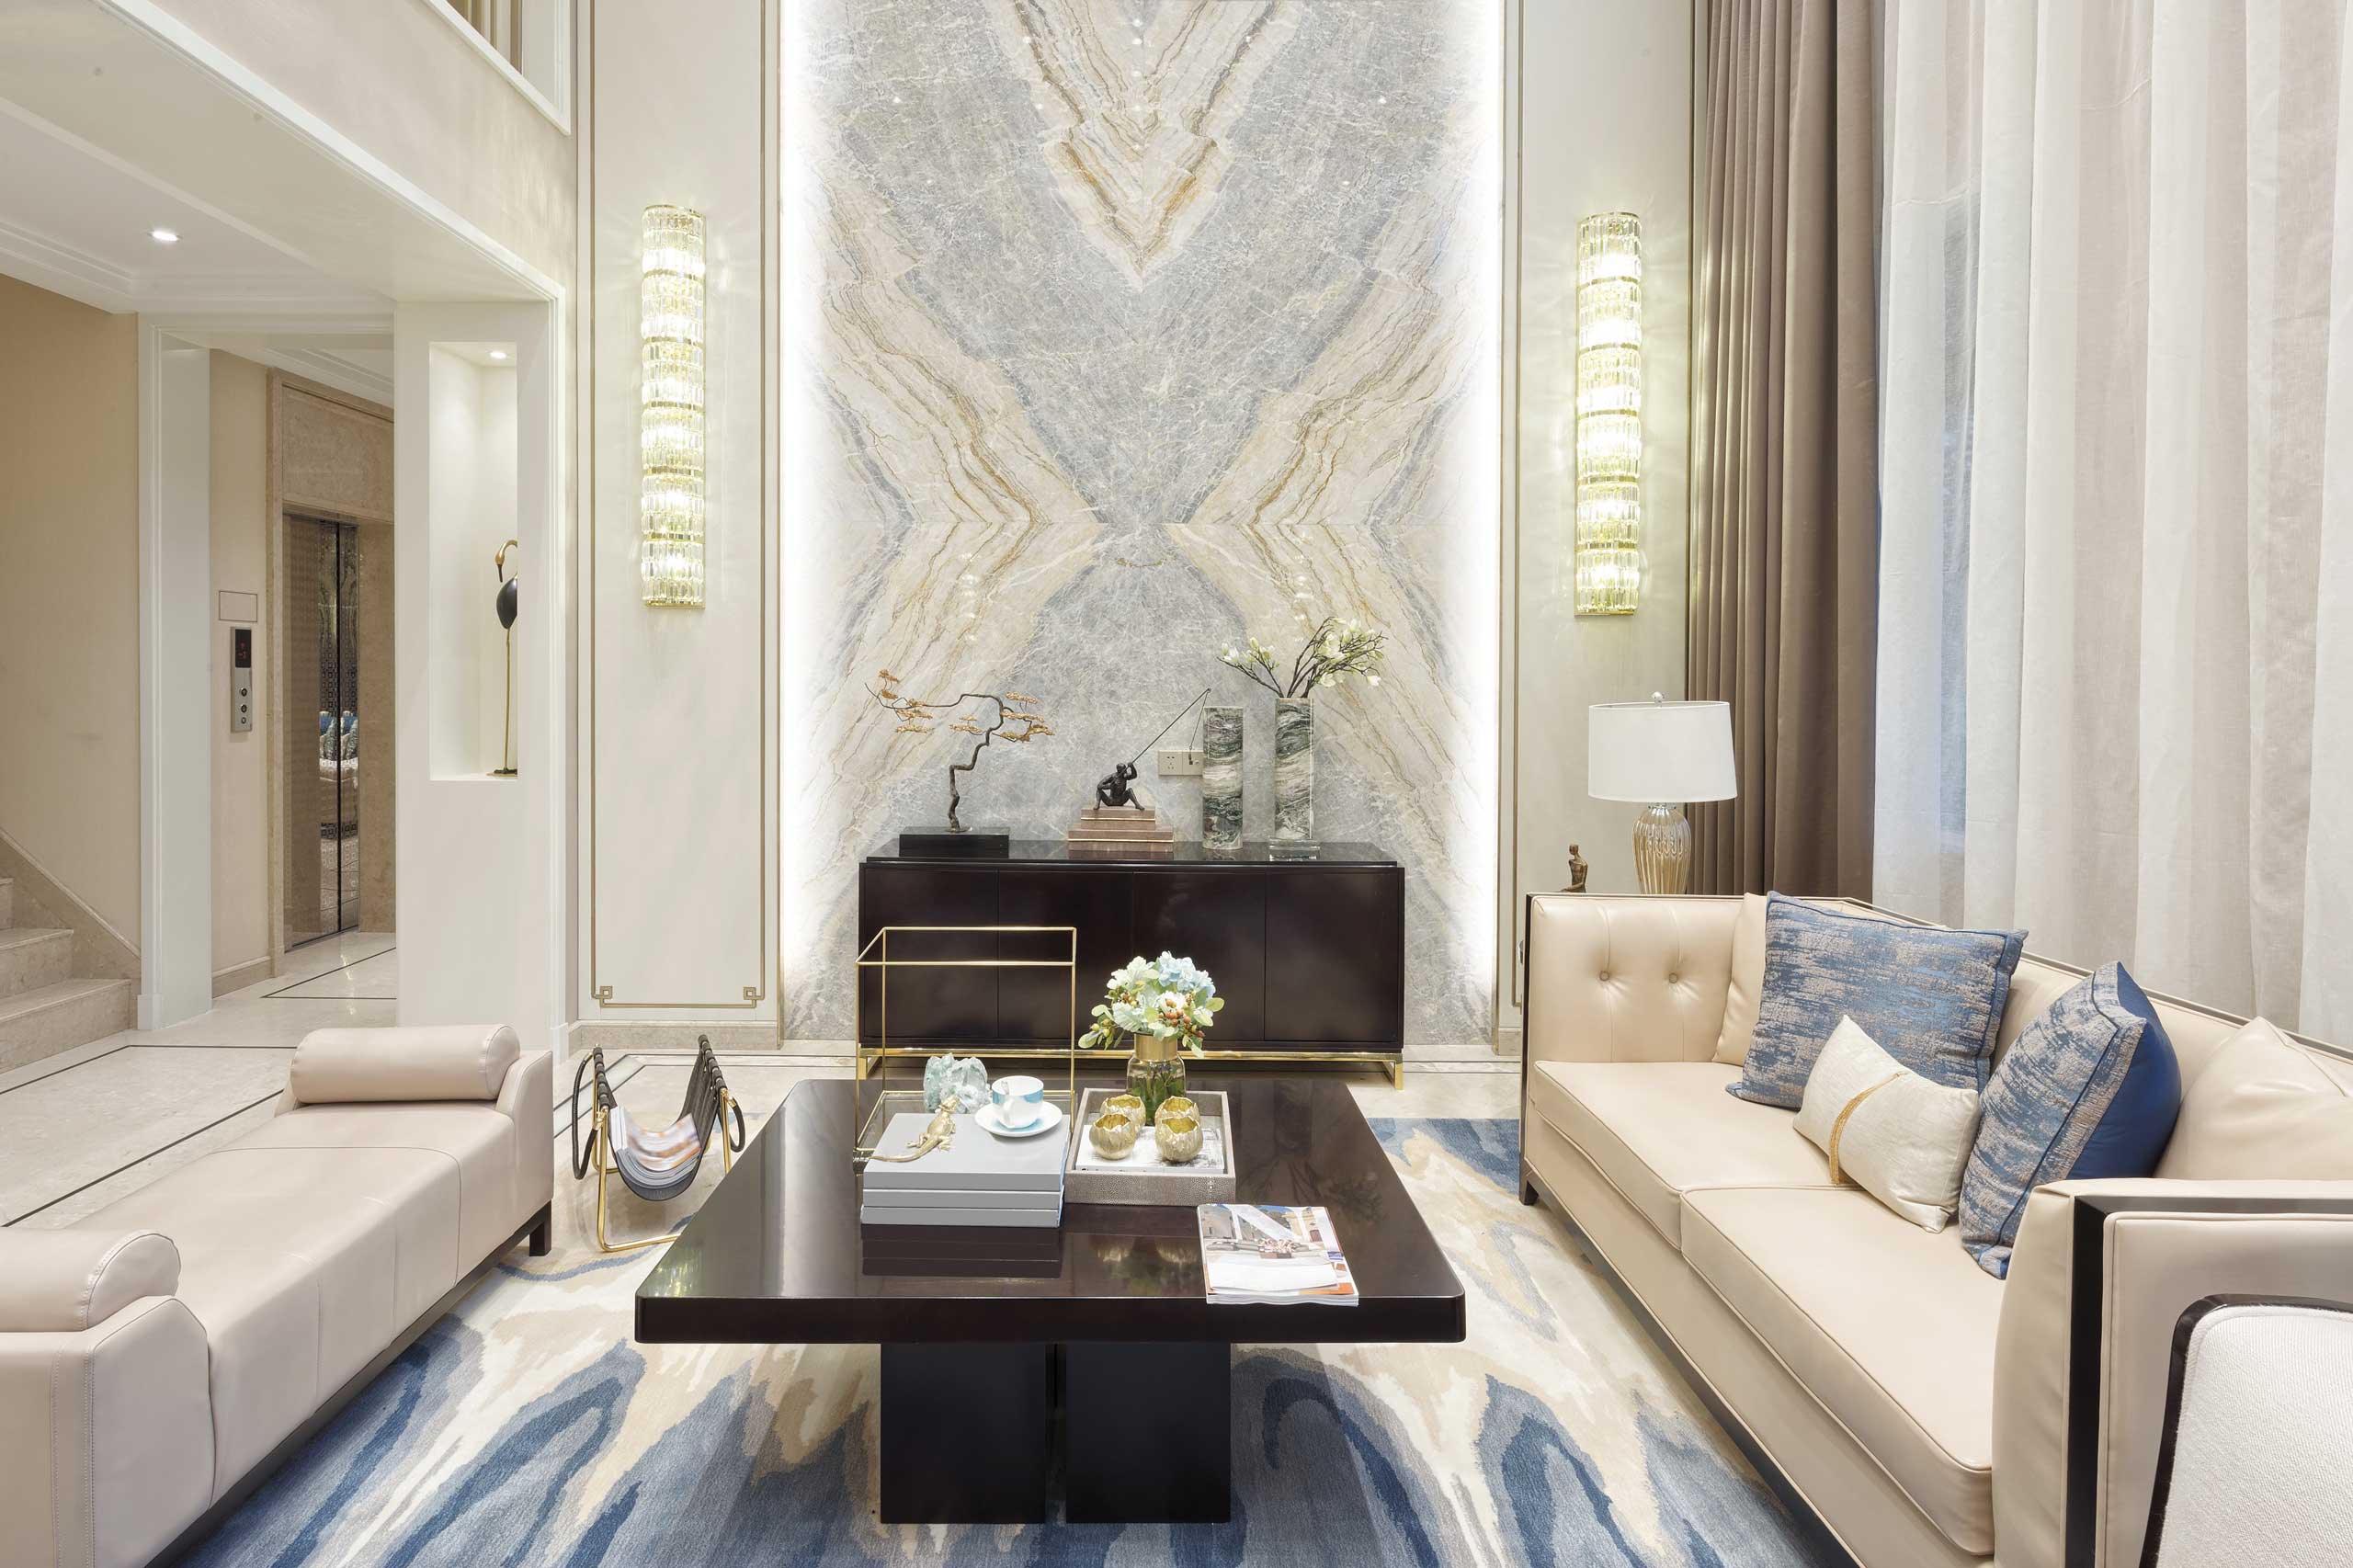 Contemporary Italian furniture in a luxurious sitting area | Utec 1921 sourcing advisors